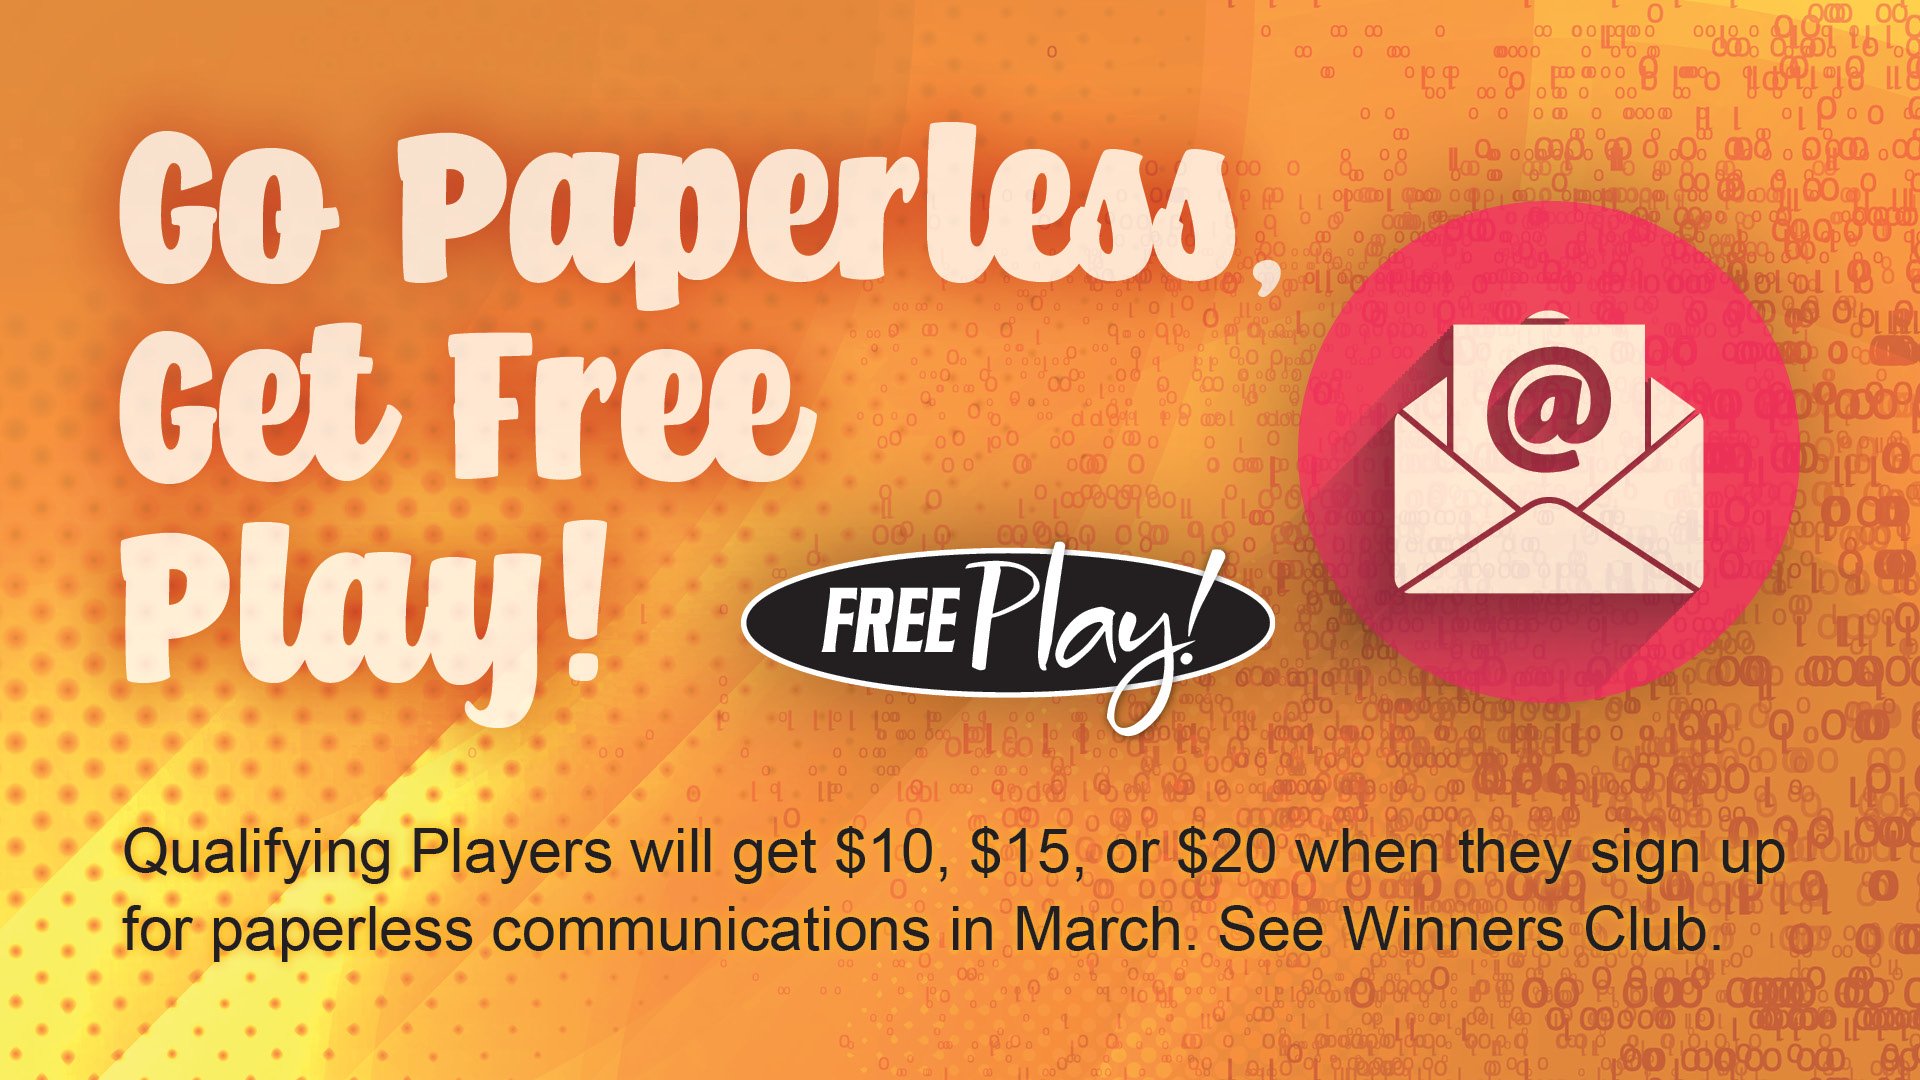 Go paperless, get up to $20 free play in March